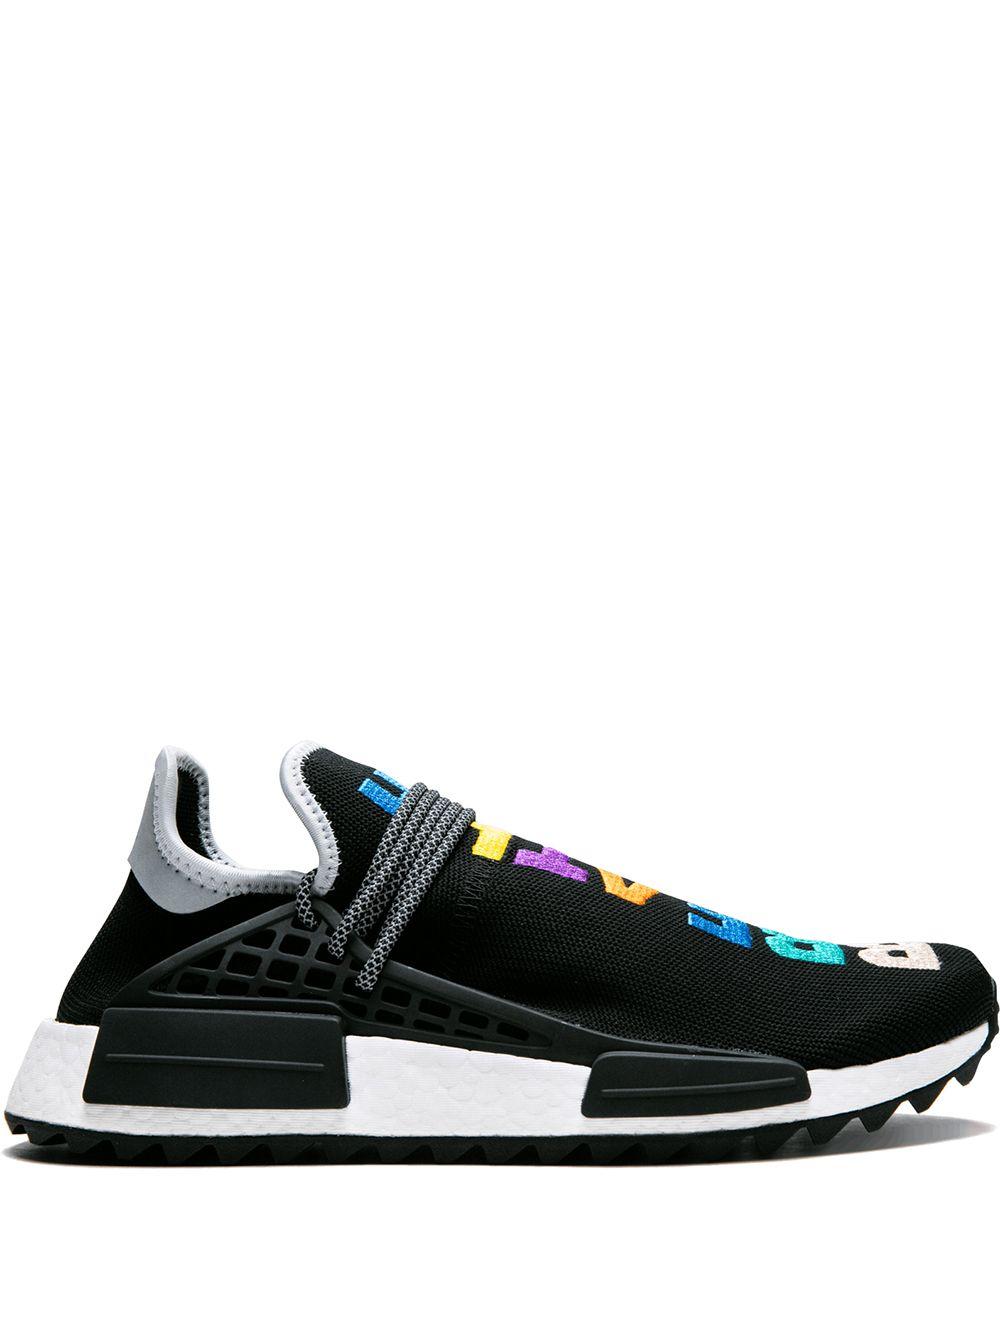 adidas Rubber Pharrell Williams Hu Nmd Tr 'friends & Family Breathe/walk'  Shoes in Black/White (Black) for Men - Save 6% | Lyst